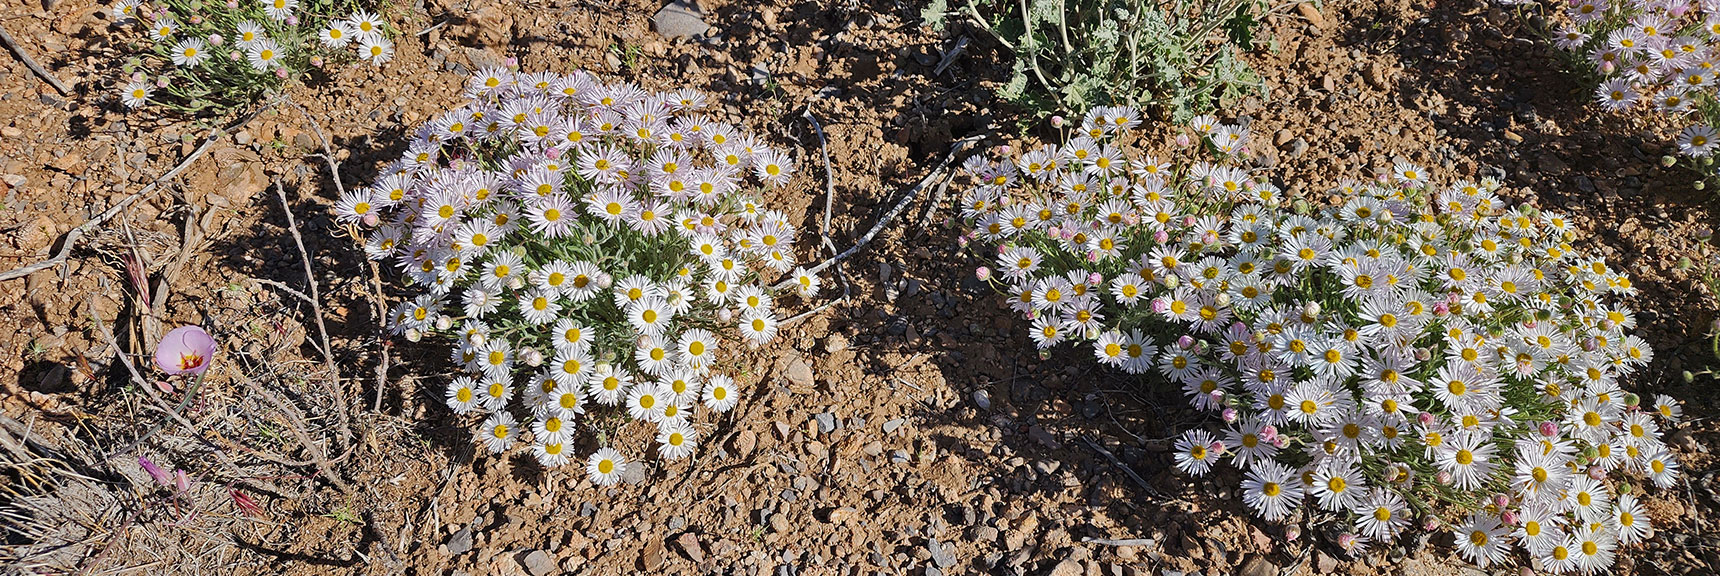 Collecting Now, Will Identify Later | Flowers Above 5000ft | LasVegasAreaTrails.com | Southwestern US | Lovell Canyon, Nevada